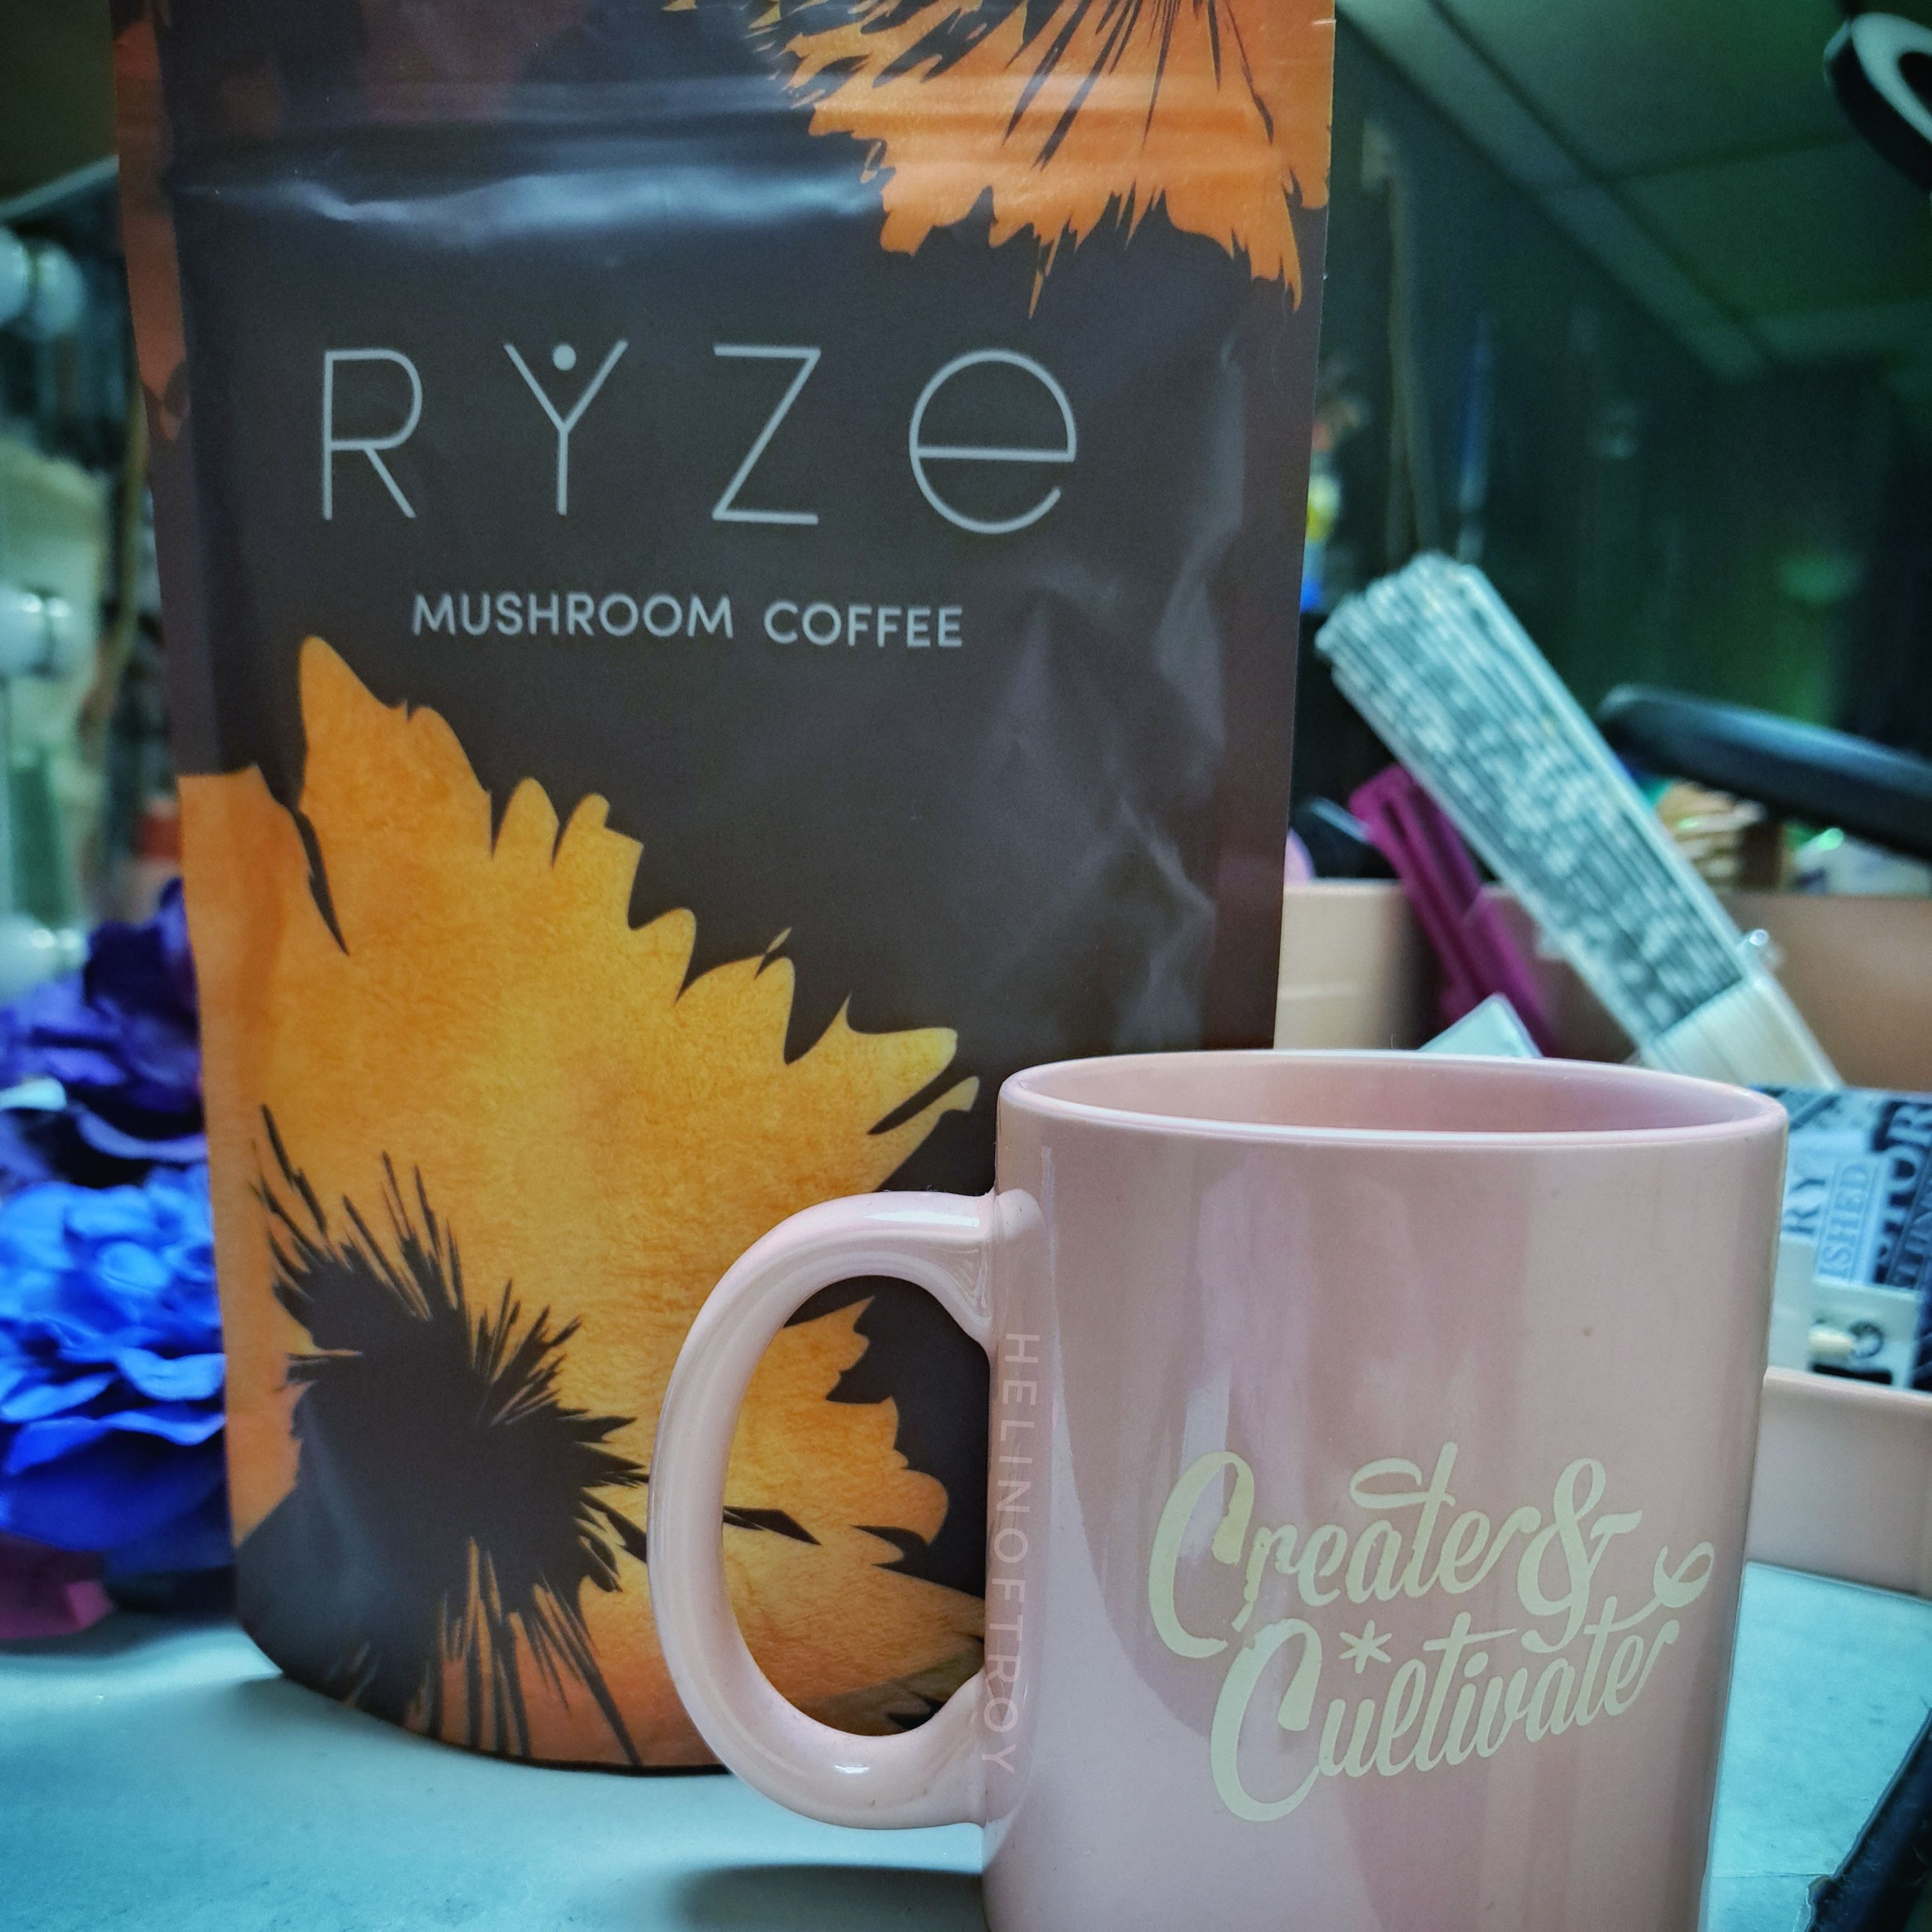 Ryze drink mix and coffee cup